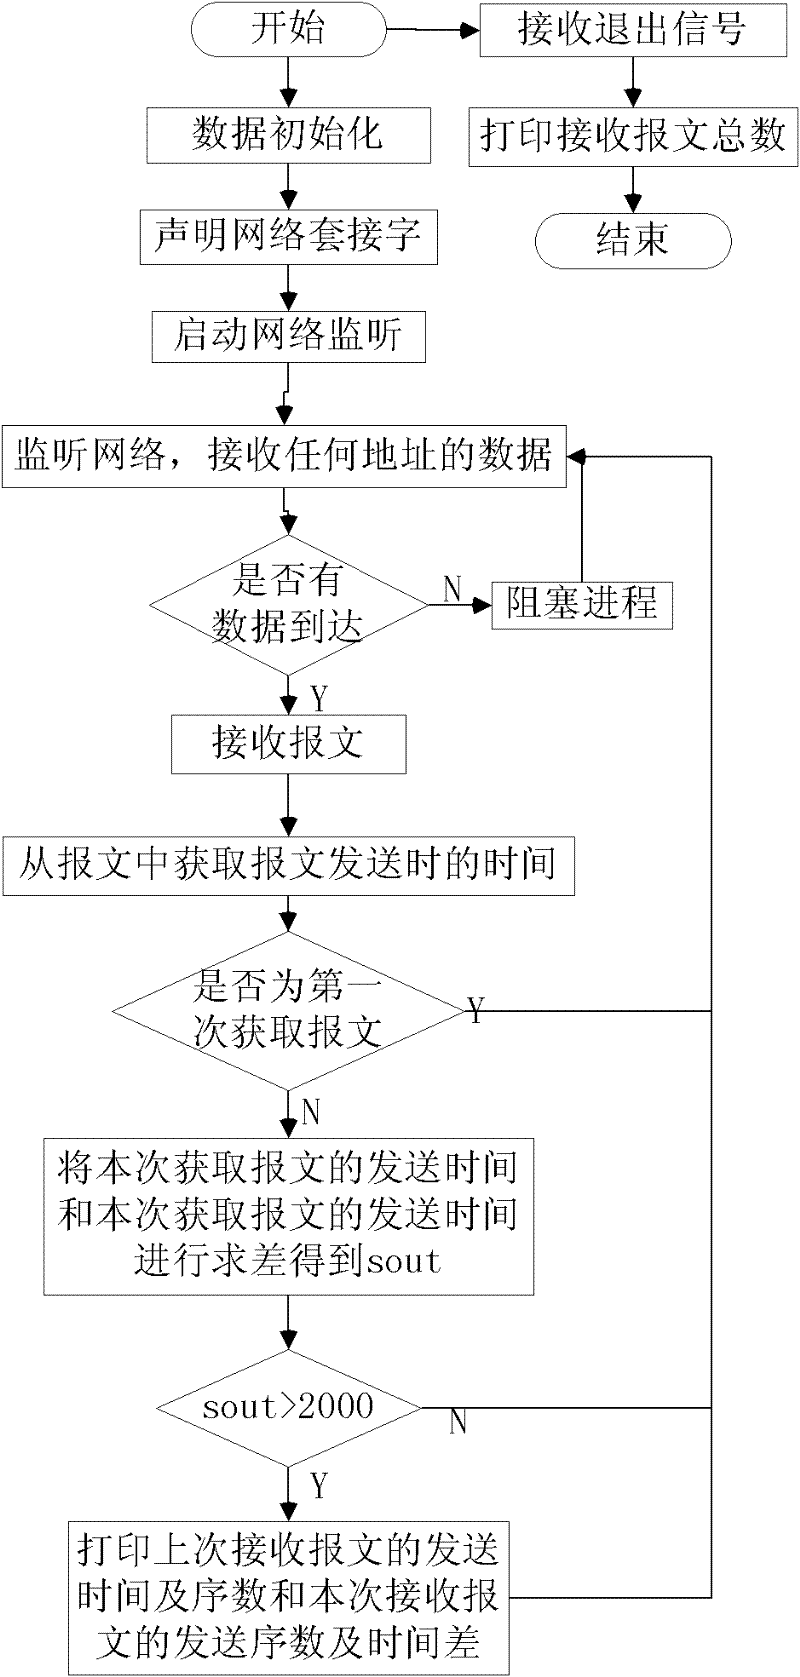 Method for rapidly switching gigabit network cards in gigabit switching environment